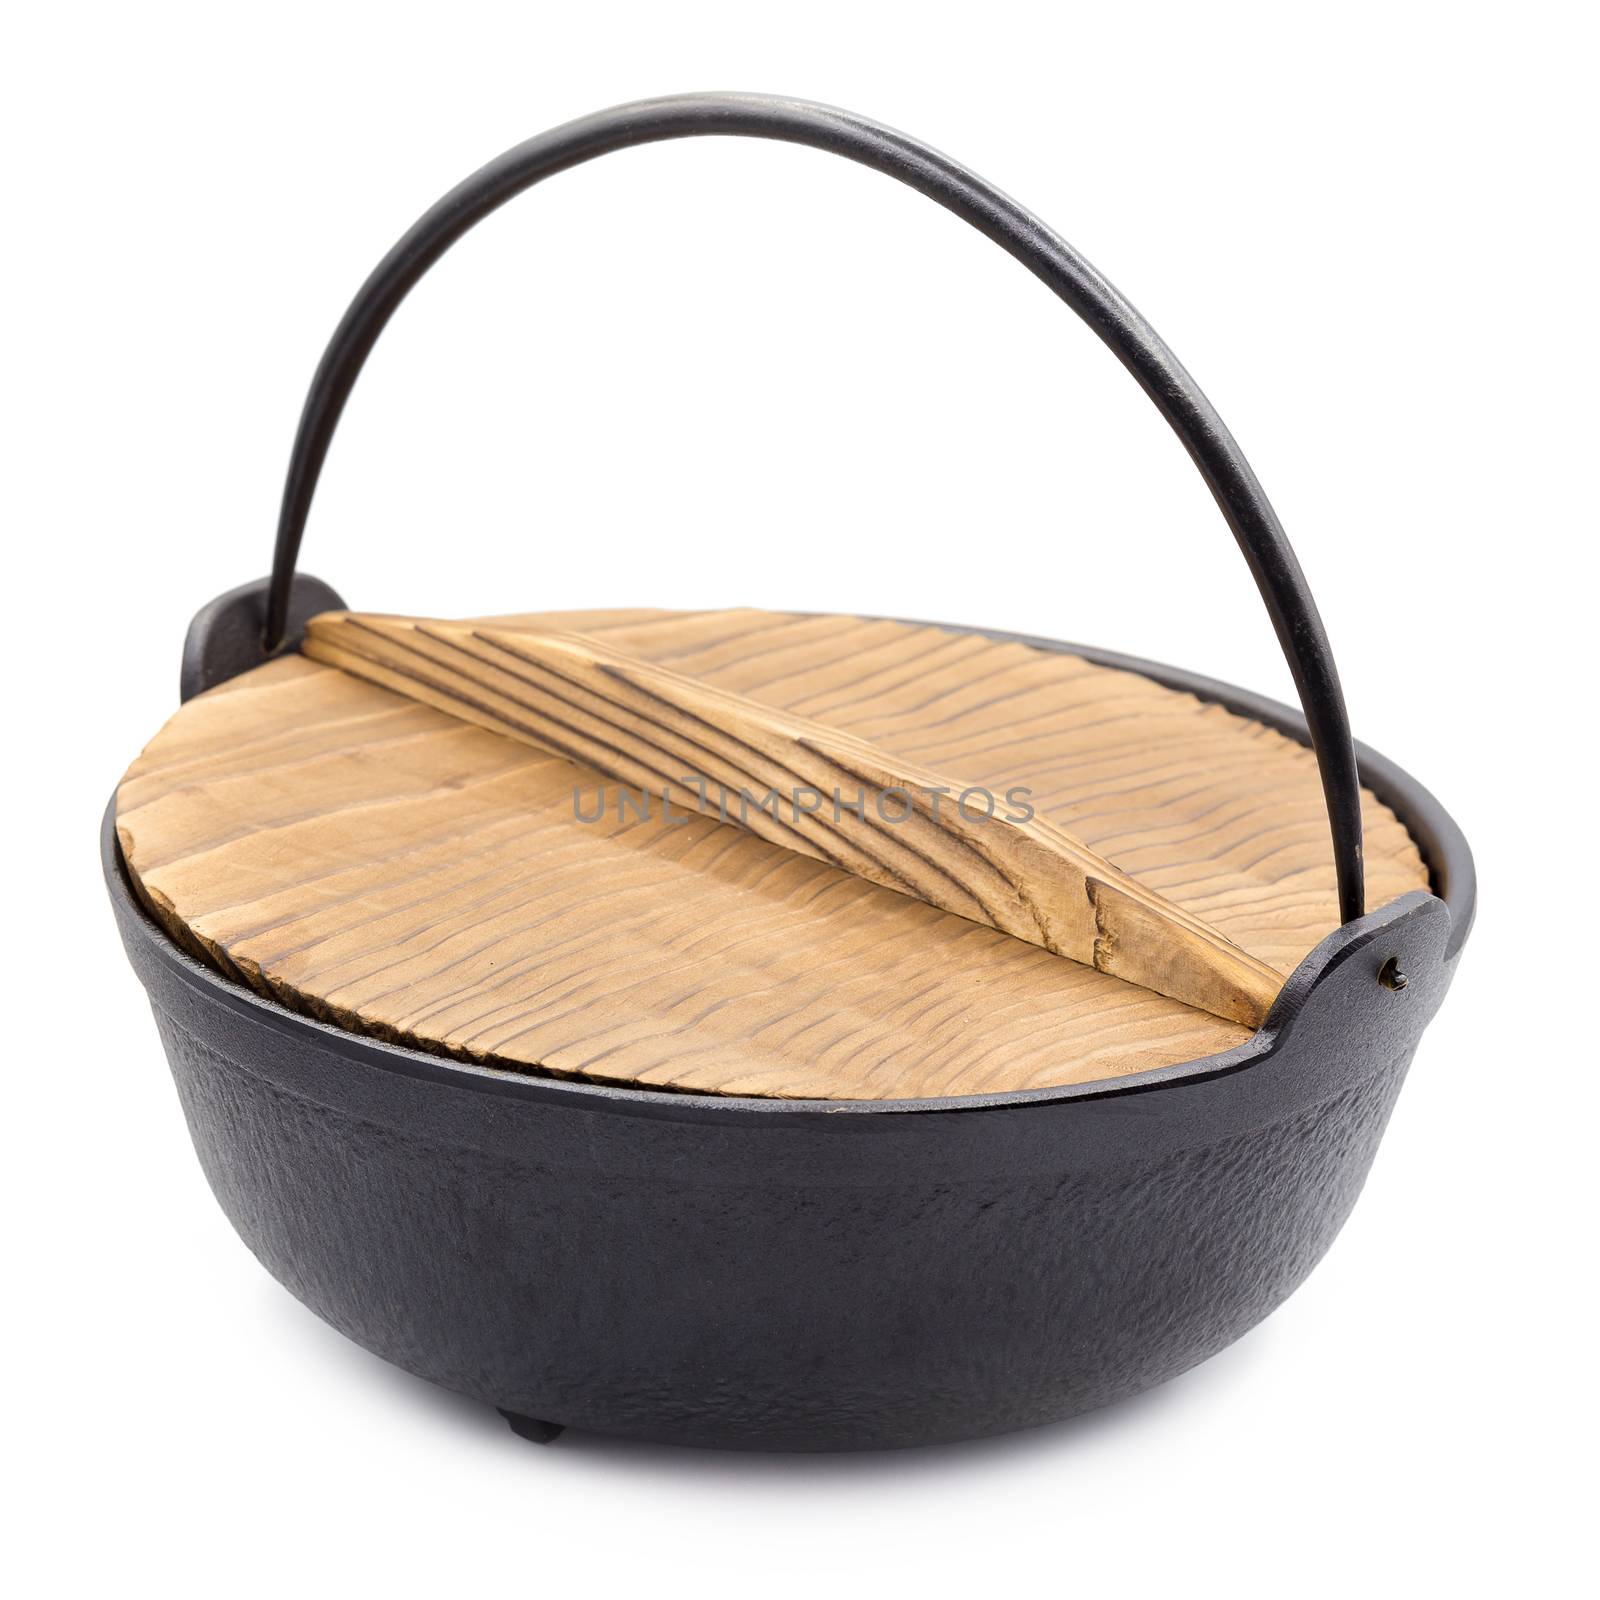 Japanese tableware, nabe for hot pot cooking, hotpot with wooden by kaiskynet